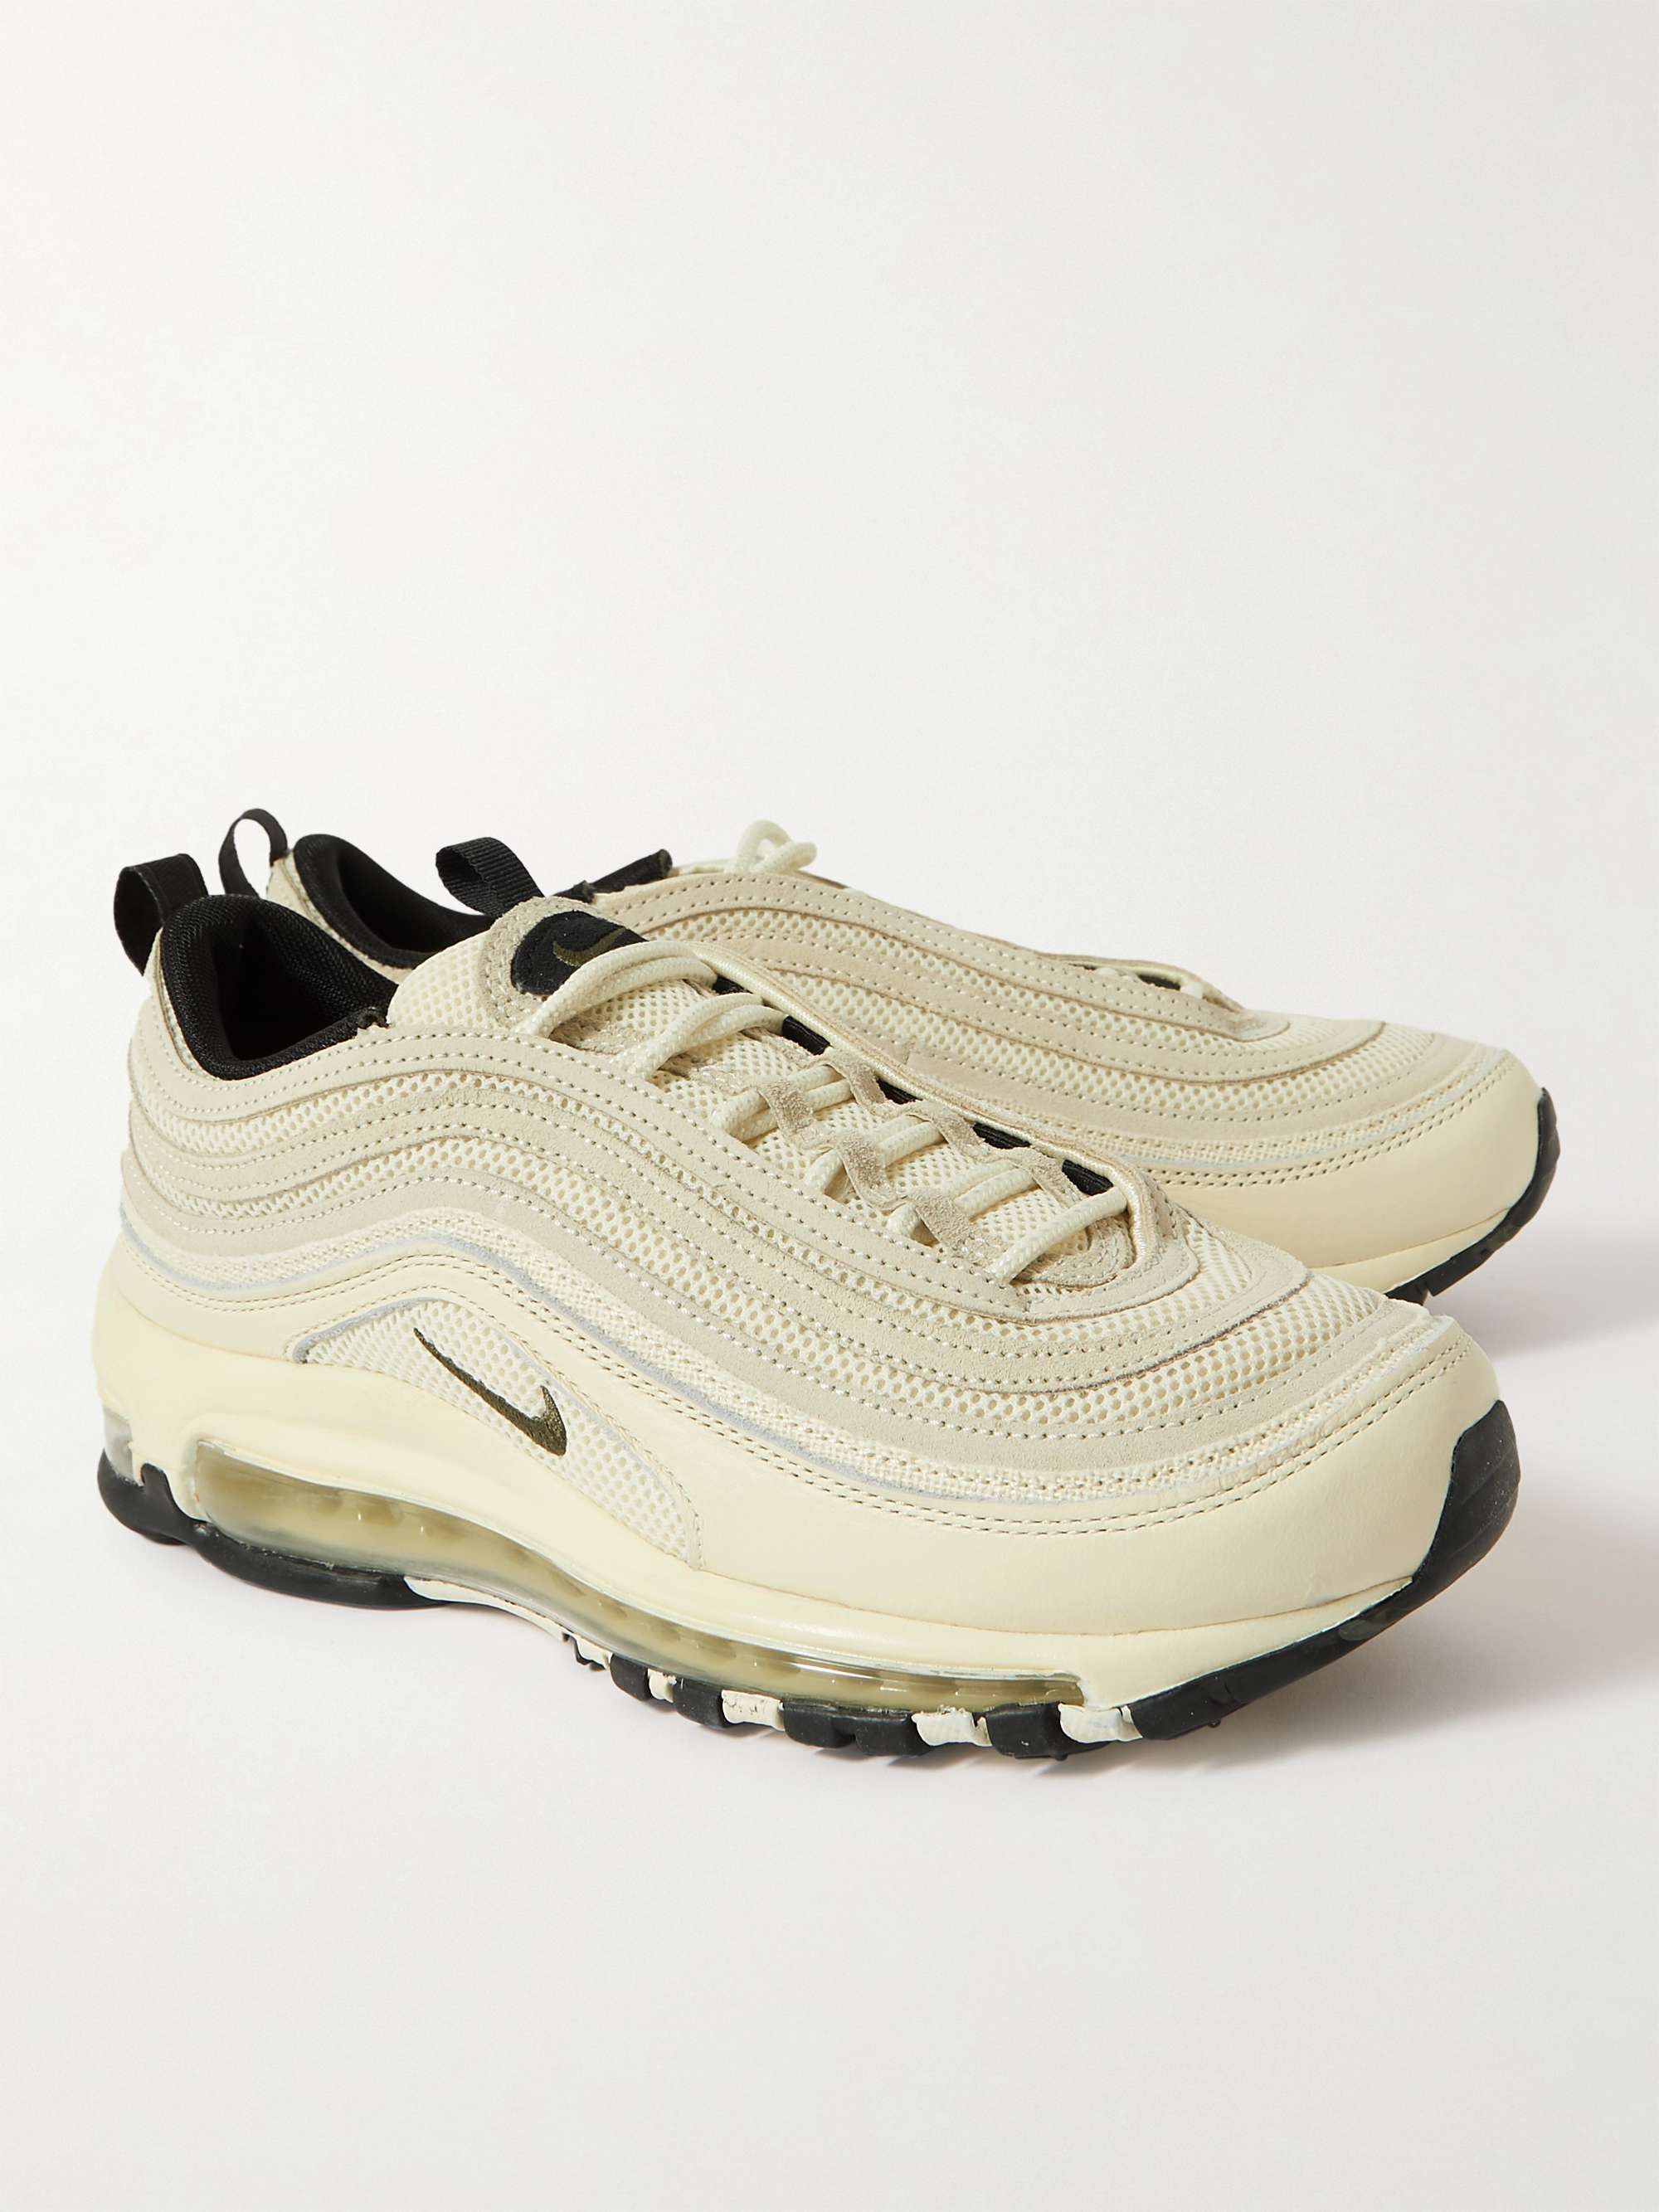 NIKE Air Max 97 Leather, Suede and Mesh Sneakers